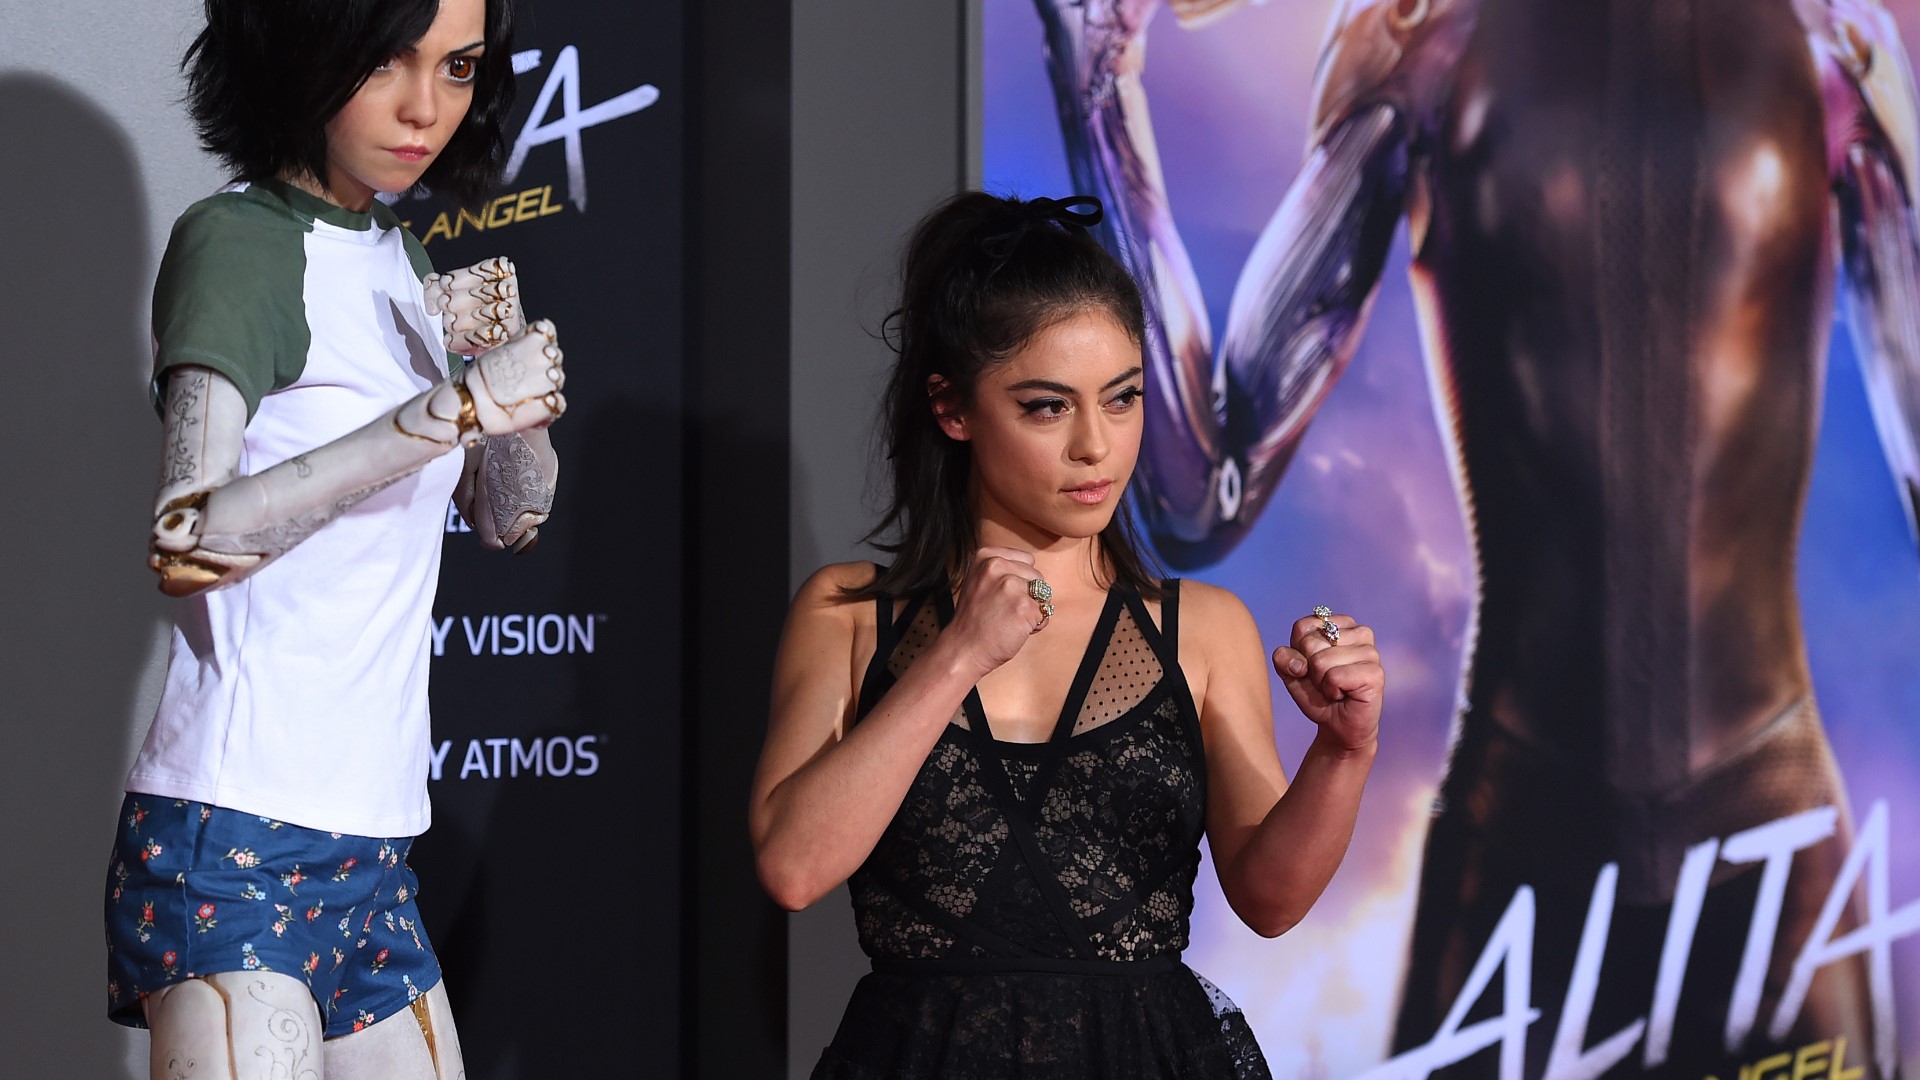 Mark S. Allen talks with the star of 'Alita,' Rosa Salazar, along with director Robert Rodriguez, and producer Jon Landau. (2/4) Interview arranged by 20th Century Fox.